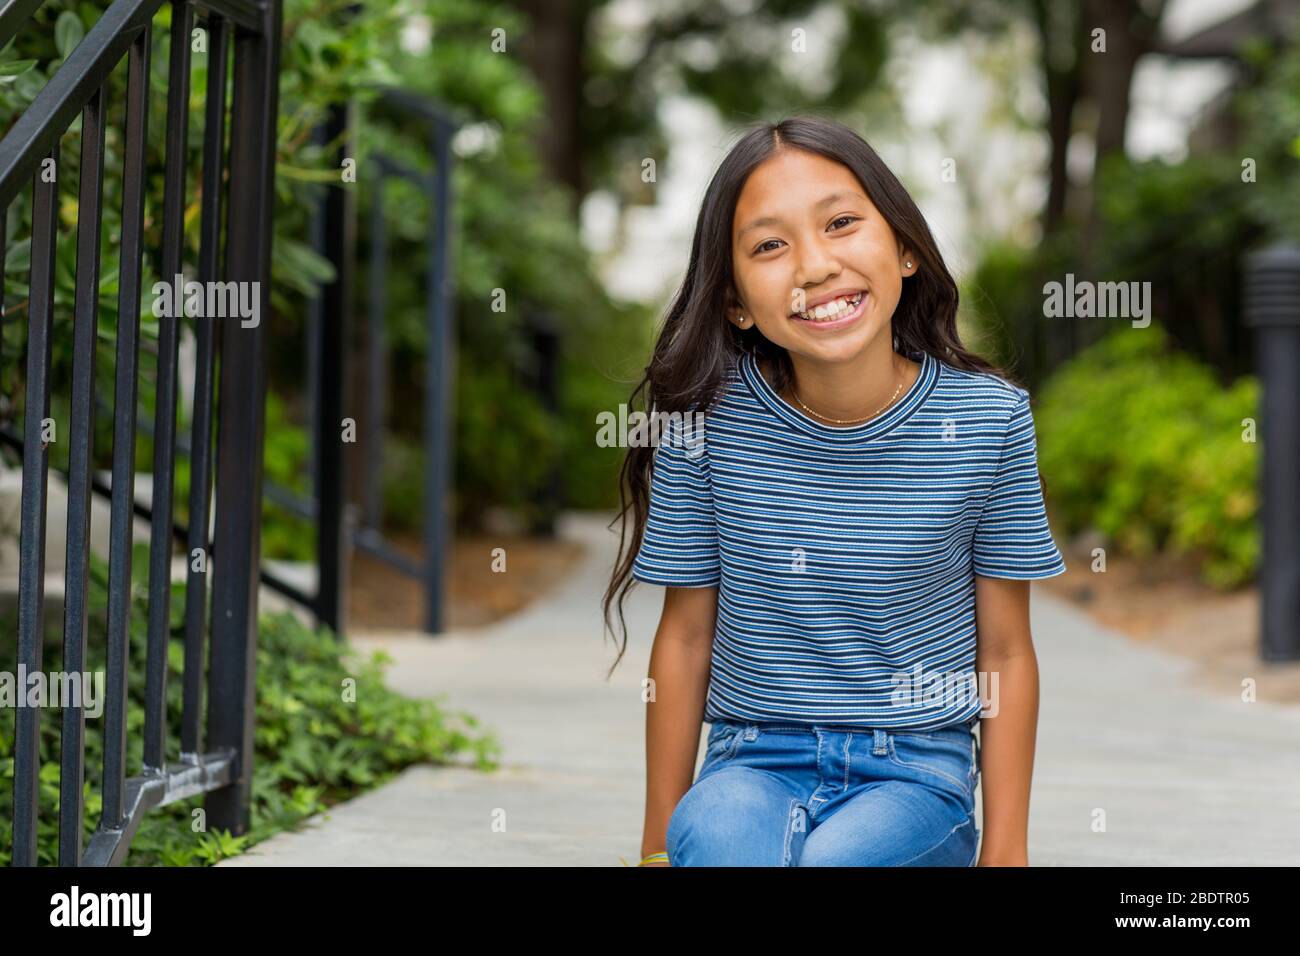 Portrait of a young Asian girl smiling outside. Stock Photo